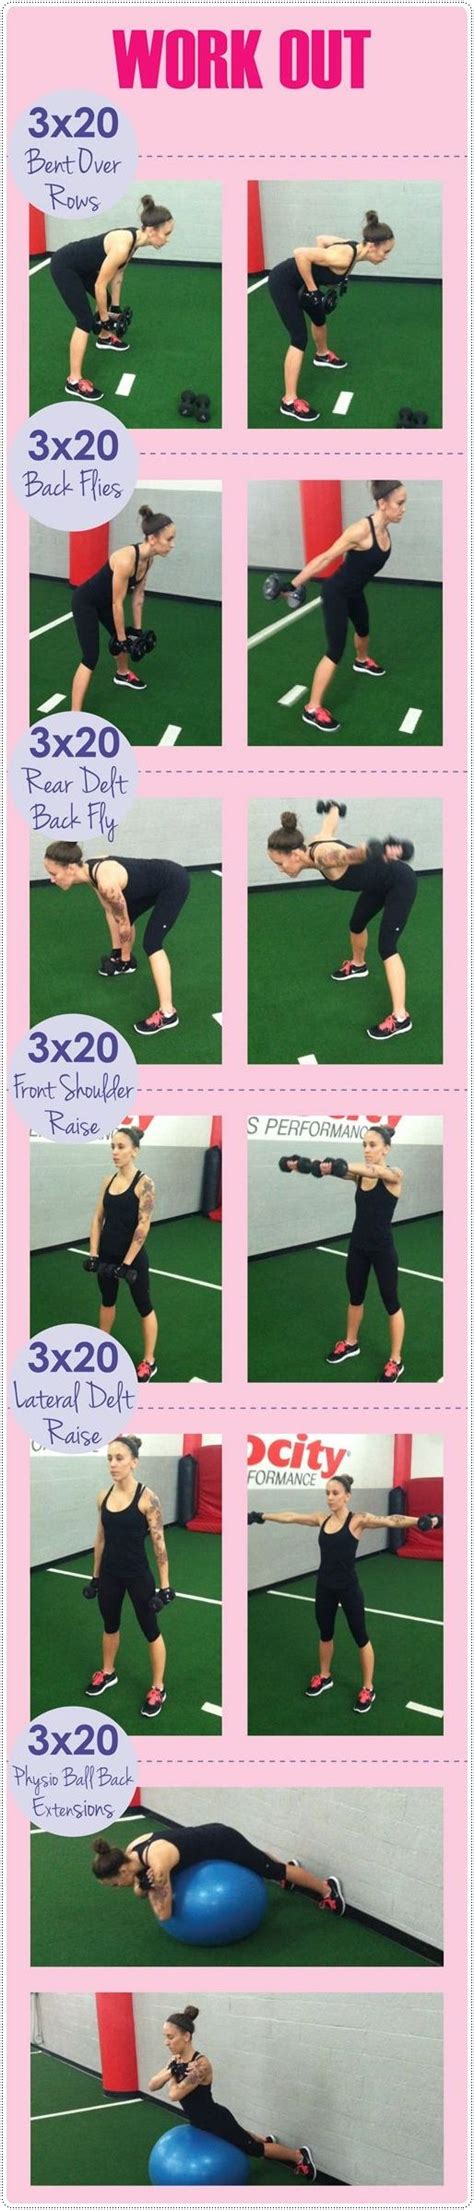 Arm Workout For Women Exercises To Get Rid Of Flabby Arms Weightloss Fitness Workouts Yoga